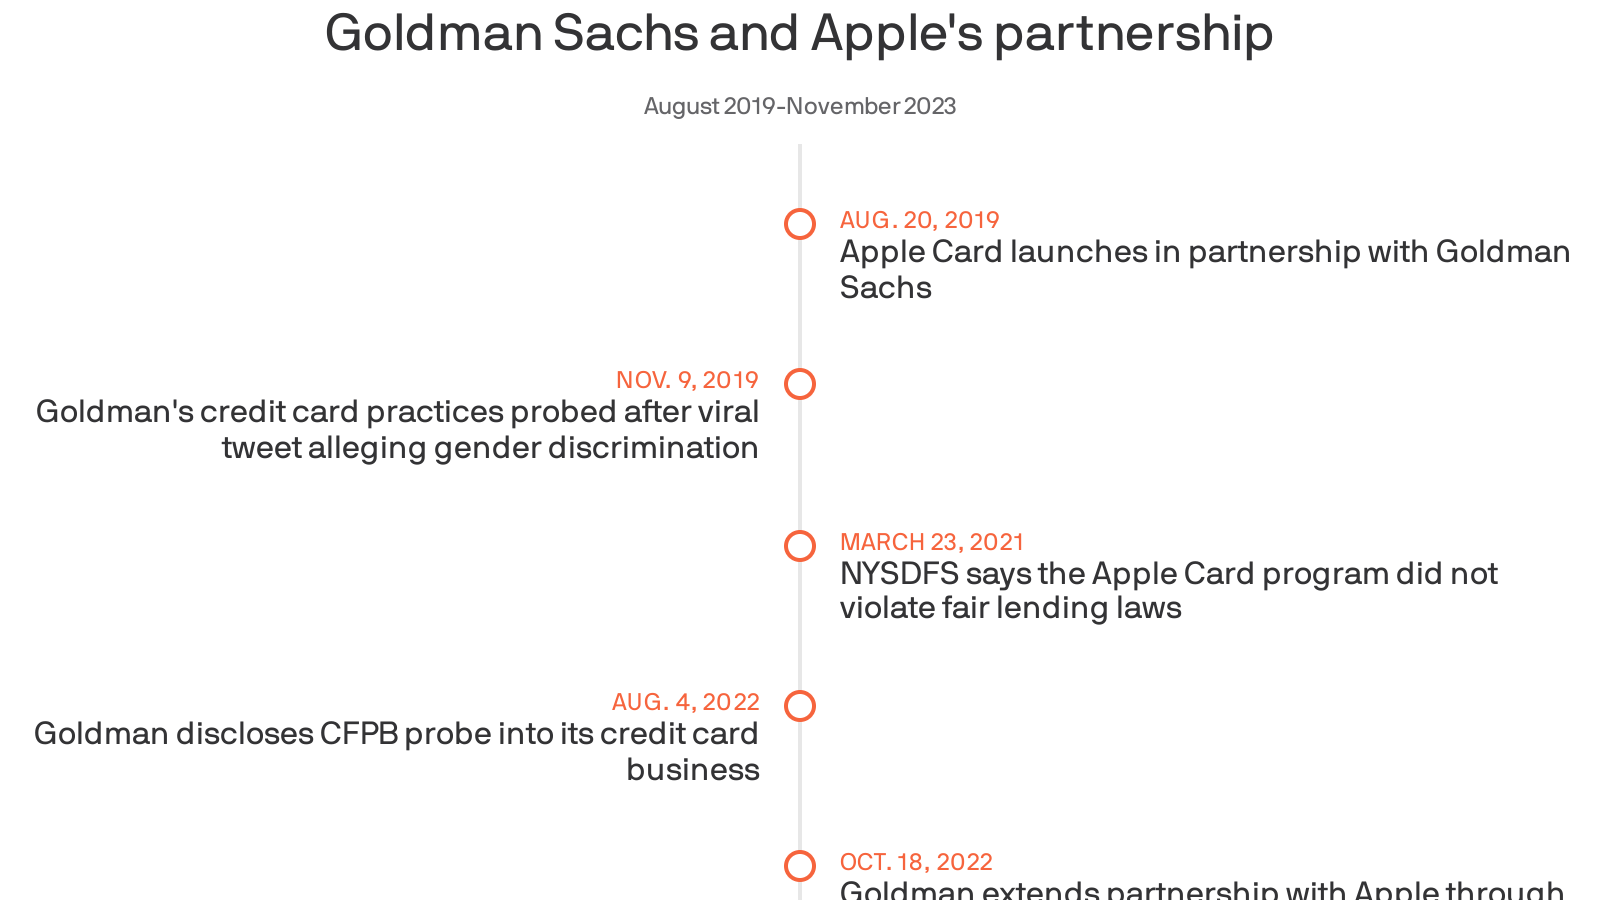 A brief history of Apple's partnership with Goldman Sachs